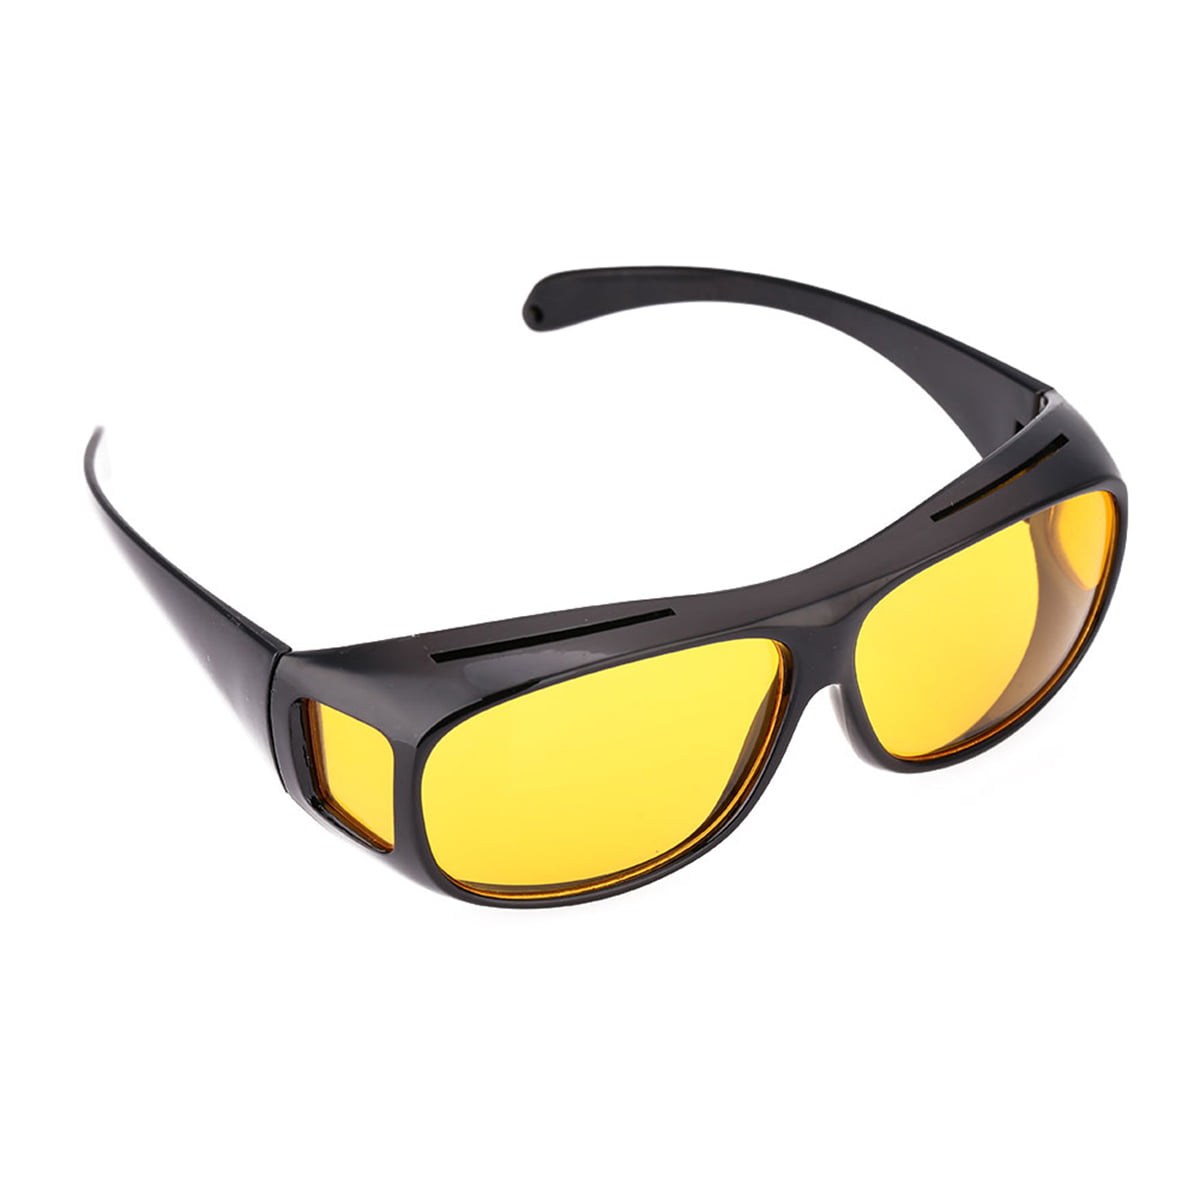 Details about   HD Aviator Sunglasses Driver Night Vision Driving Glasses Yellow Lens Anti Glare 